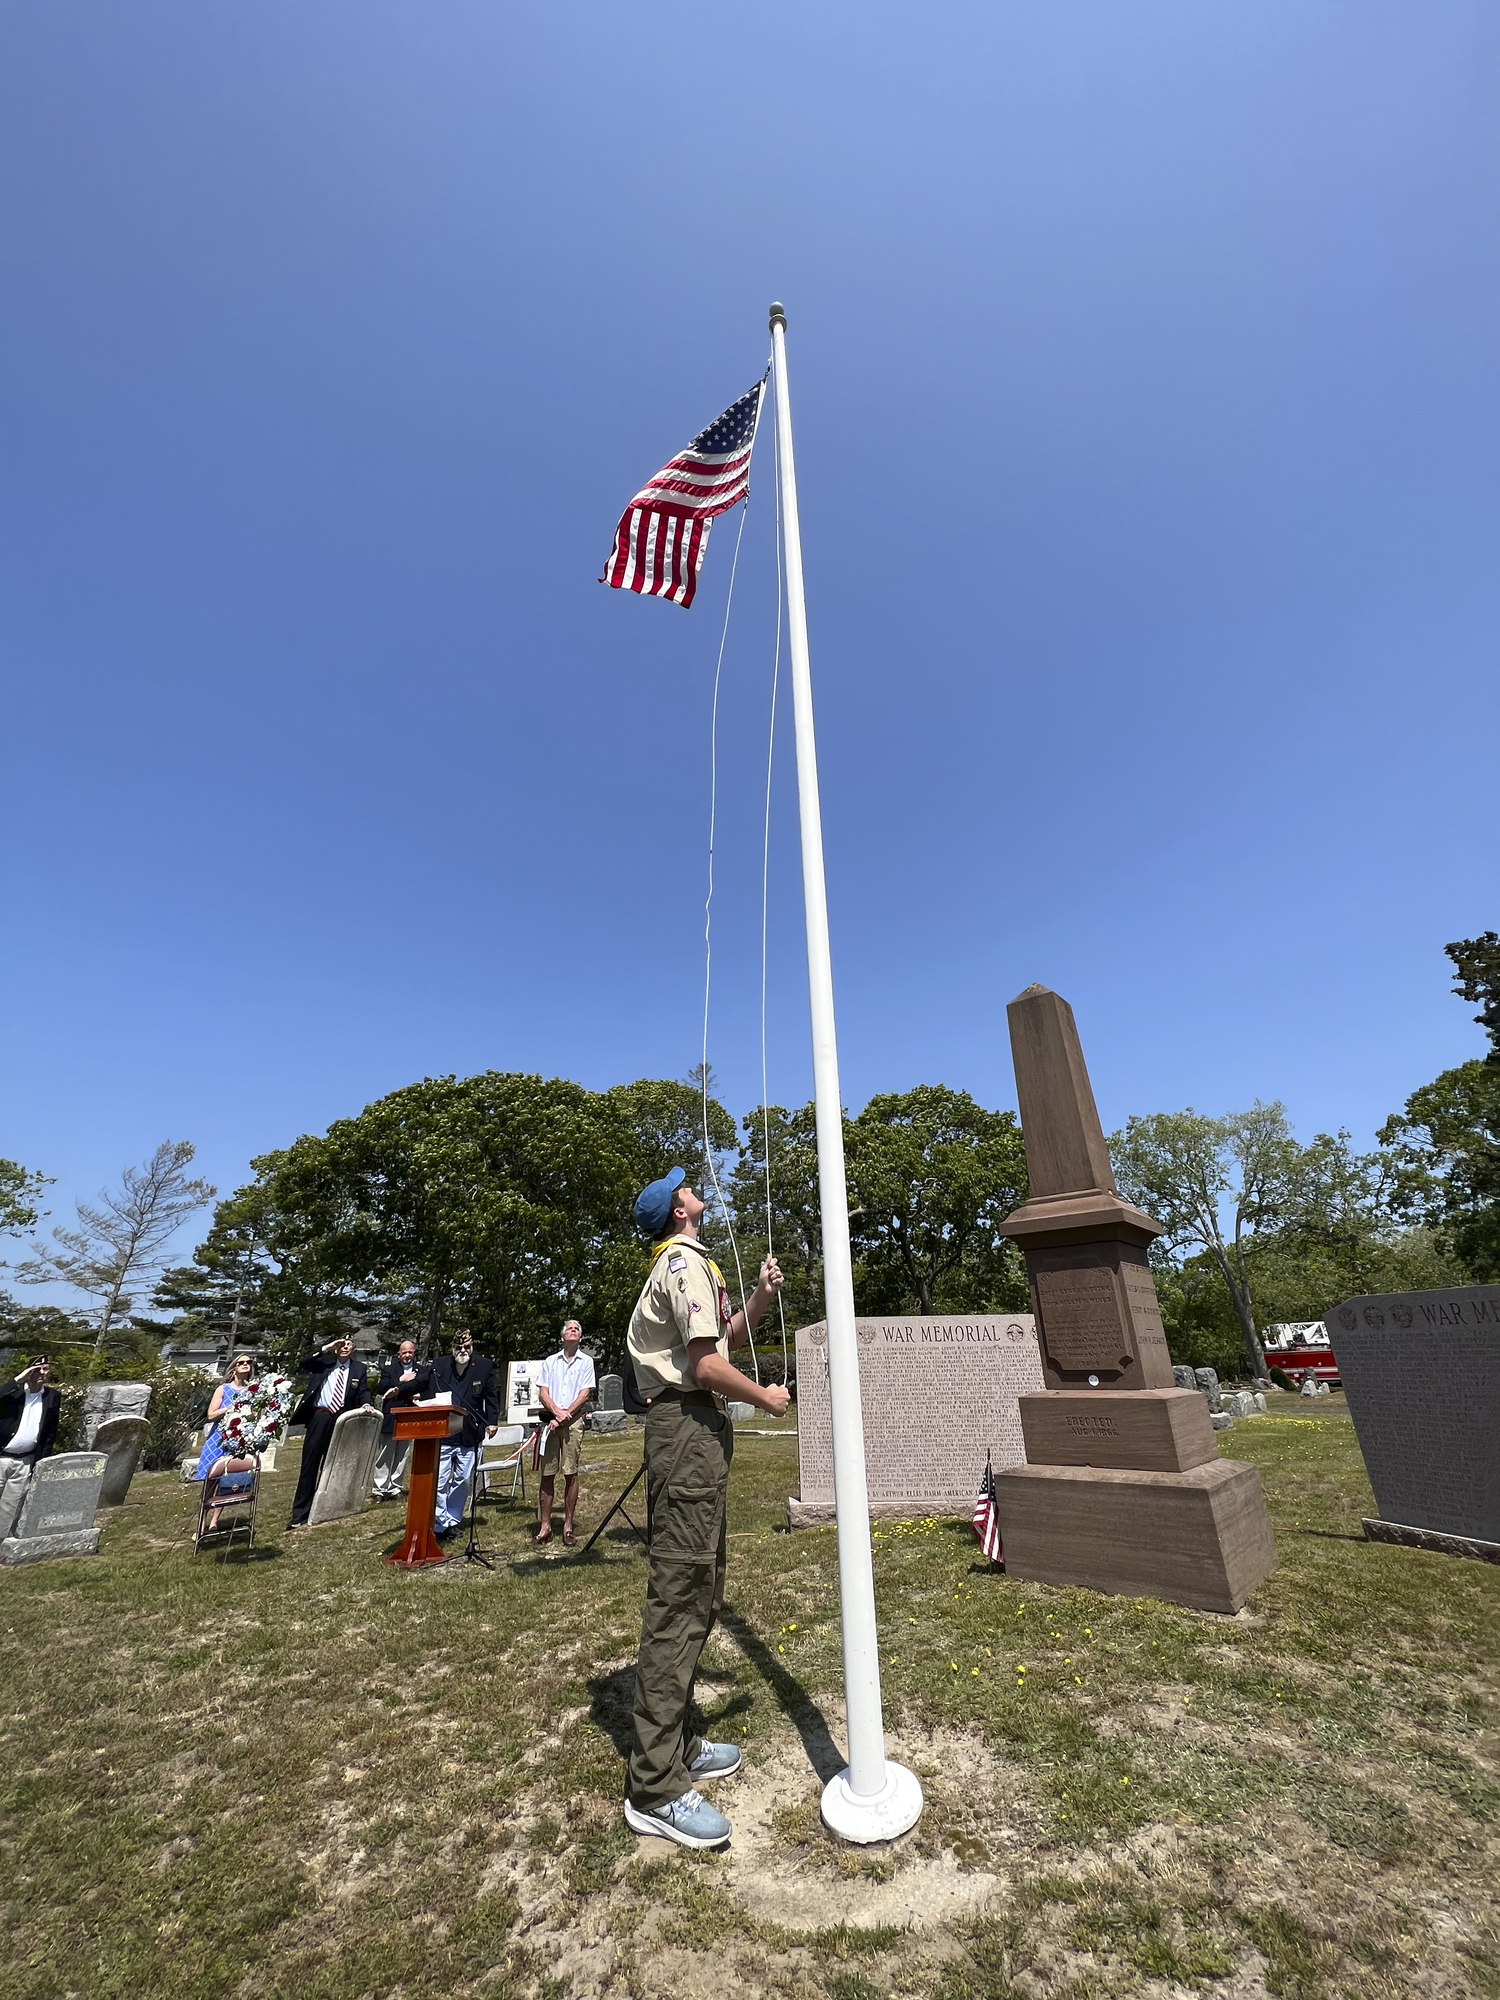 Memorial Day services at Westhampton Cemetery on Monday.